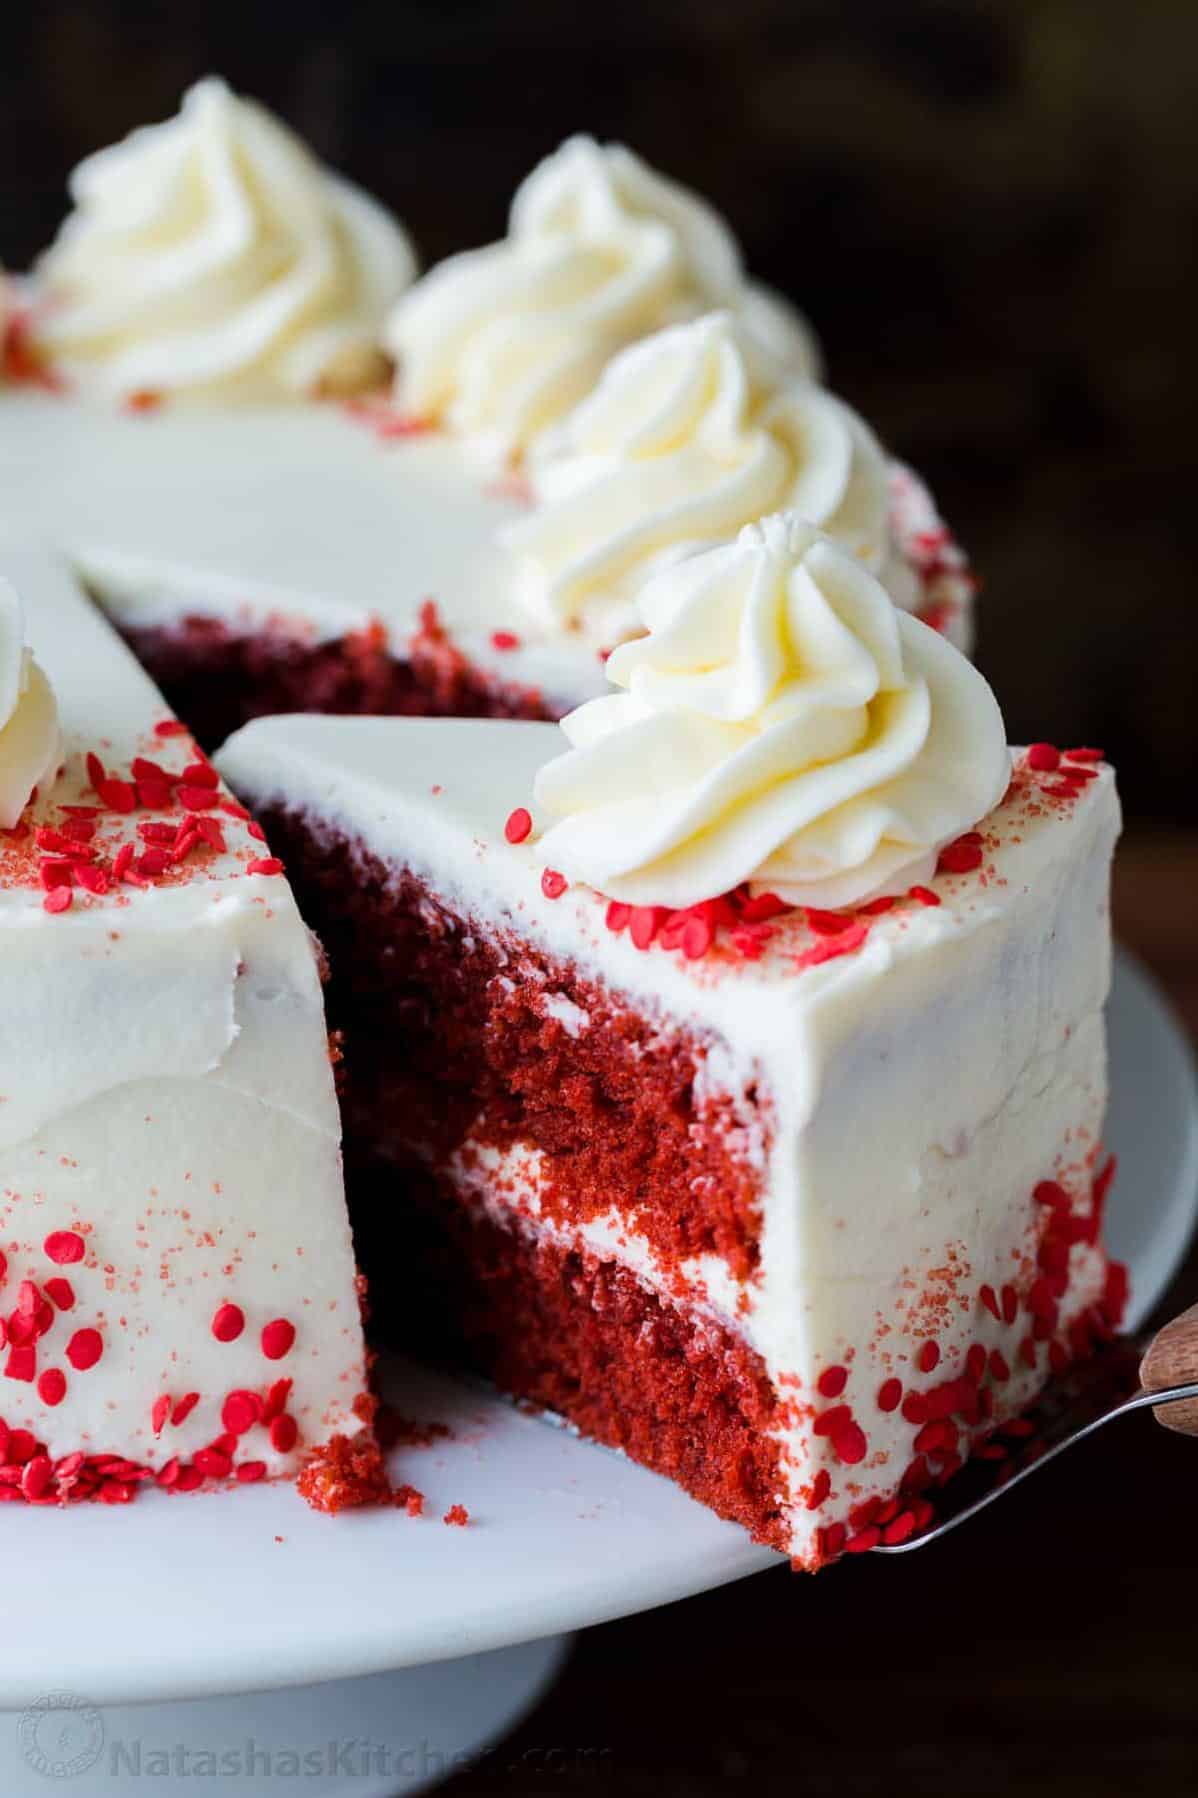  Decadent layers of moist cake and creamy frosting